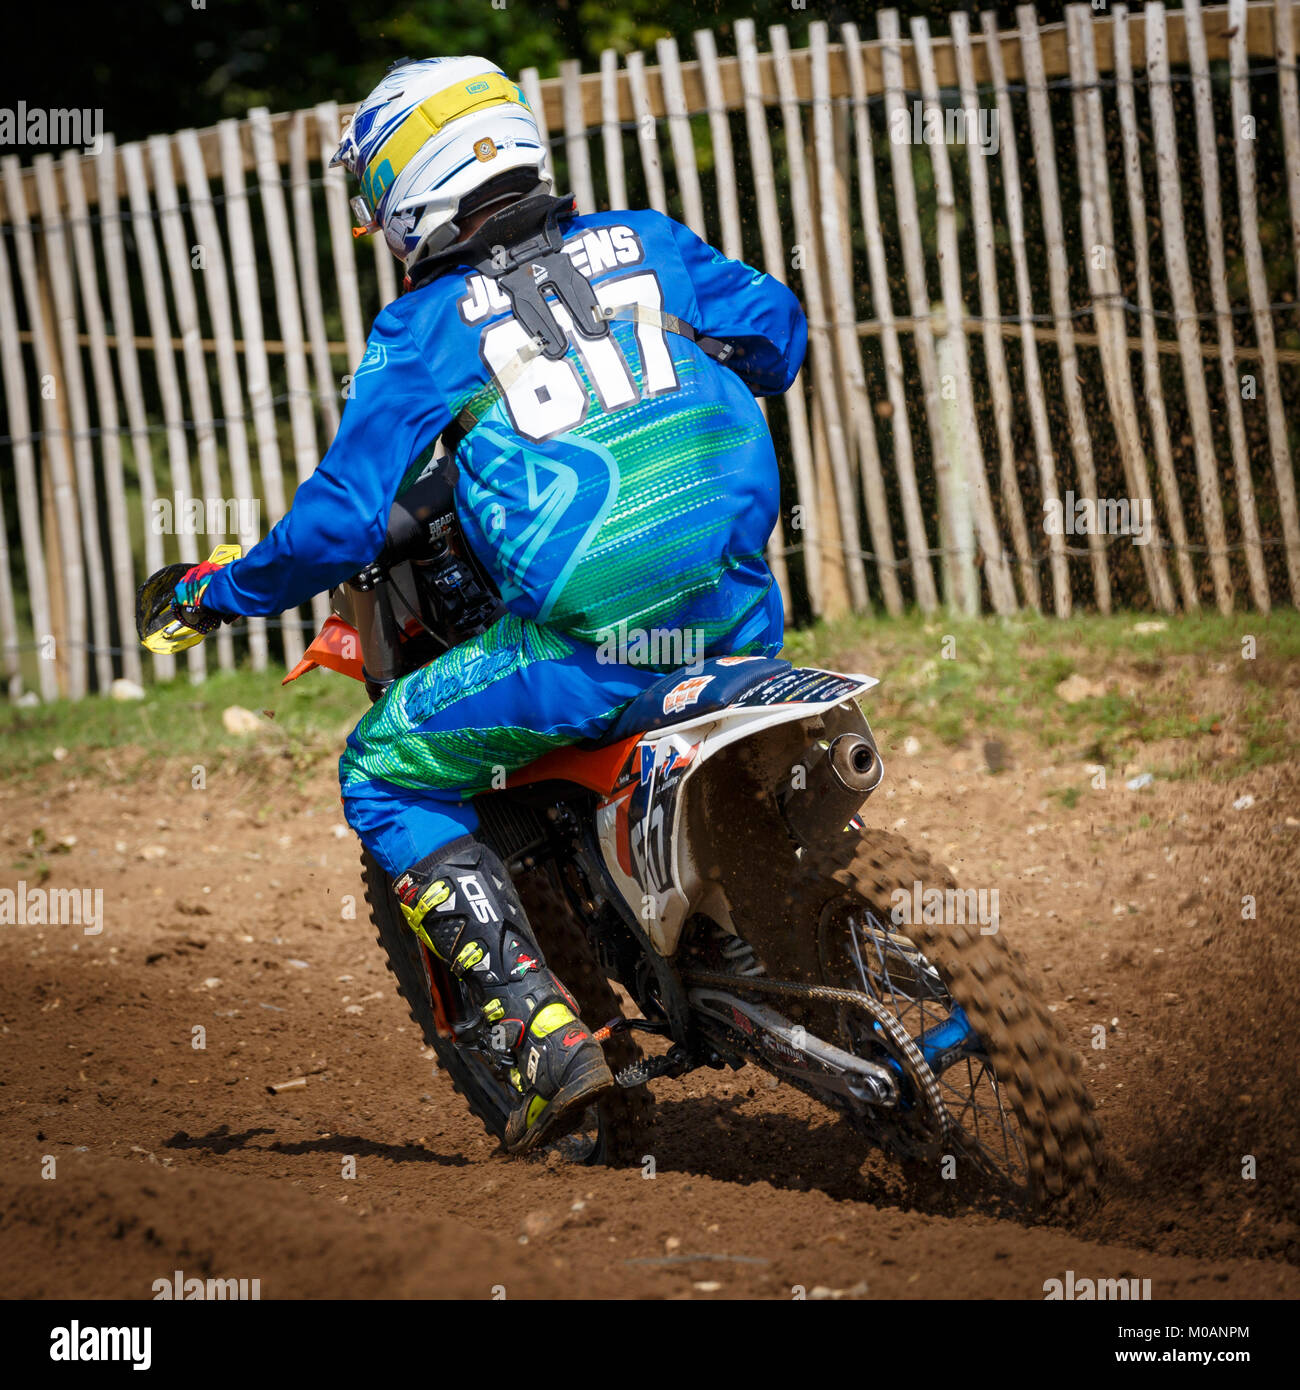 William Jurgens on the AFT Trenchs KTM 150 at the NGR & ACU Eastern EVO Championships, Cadders Hill, Lyng, Norfolk, UK. Stock Photo